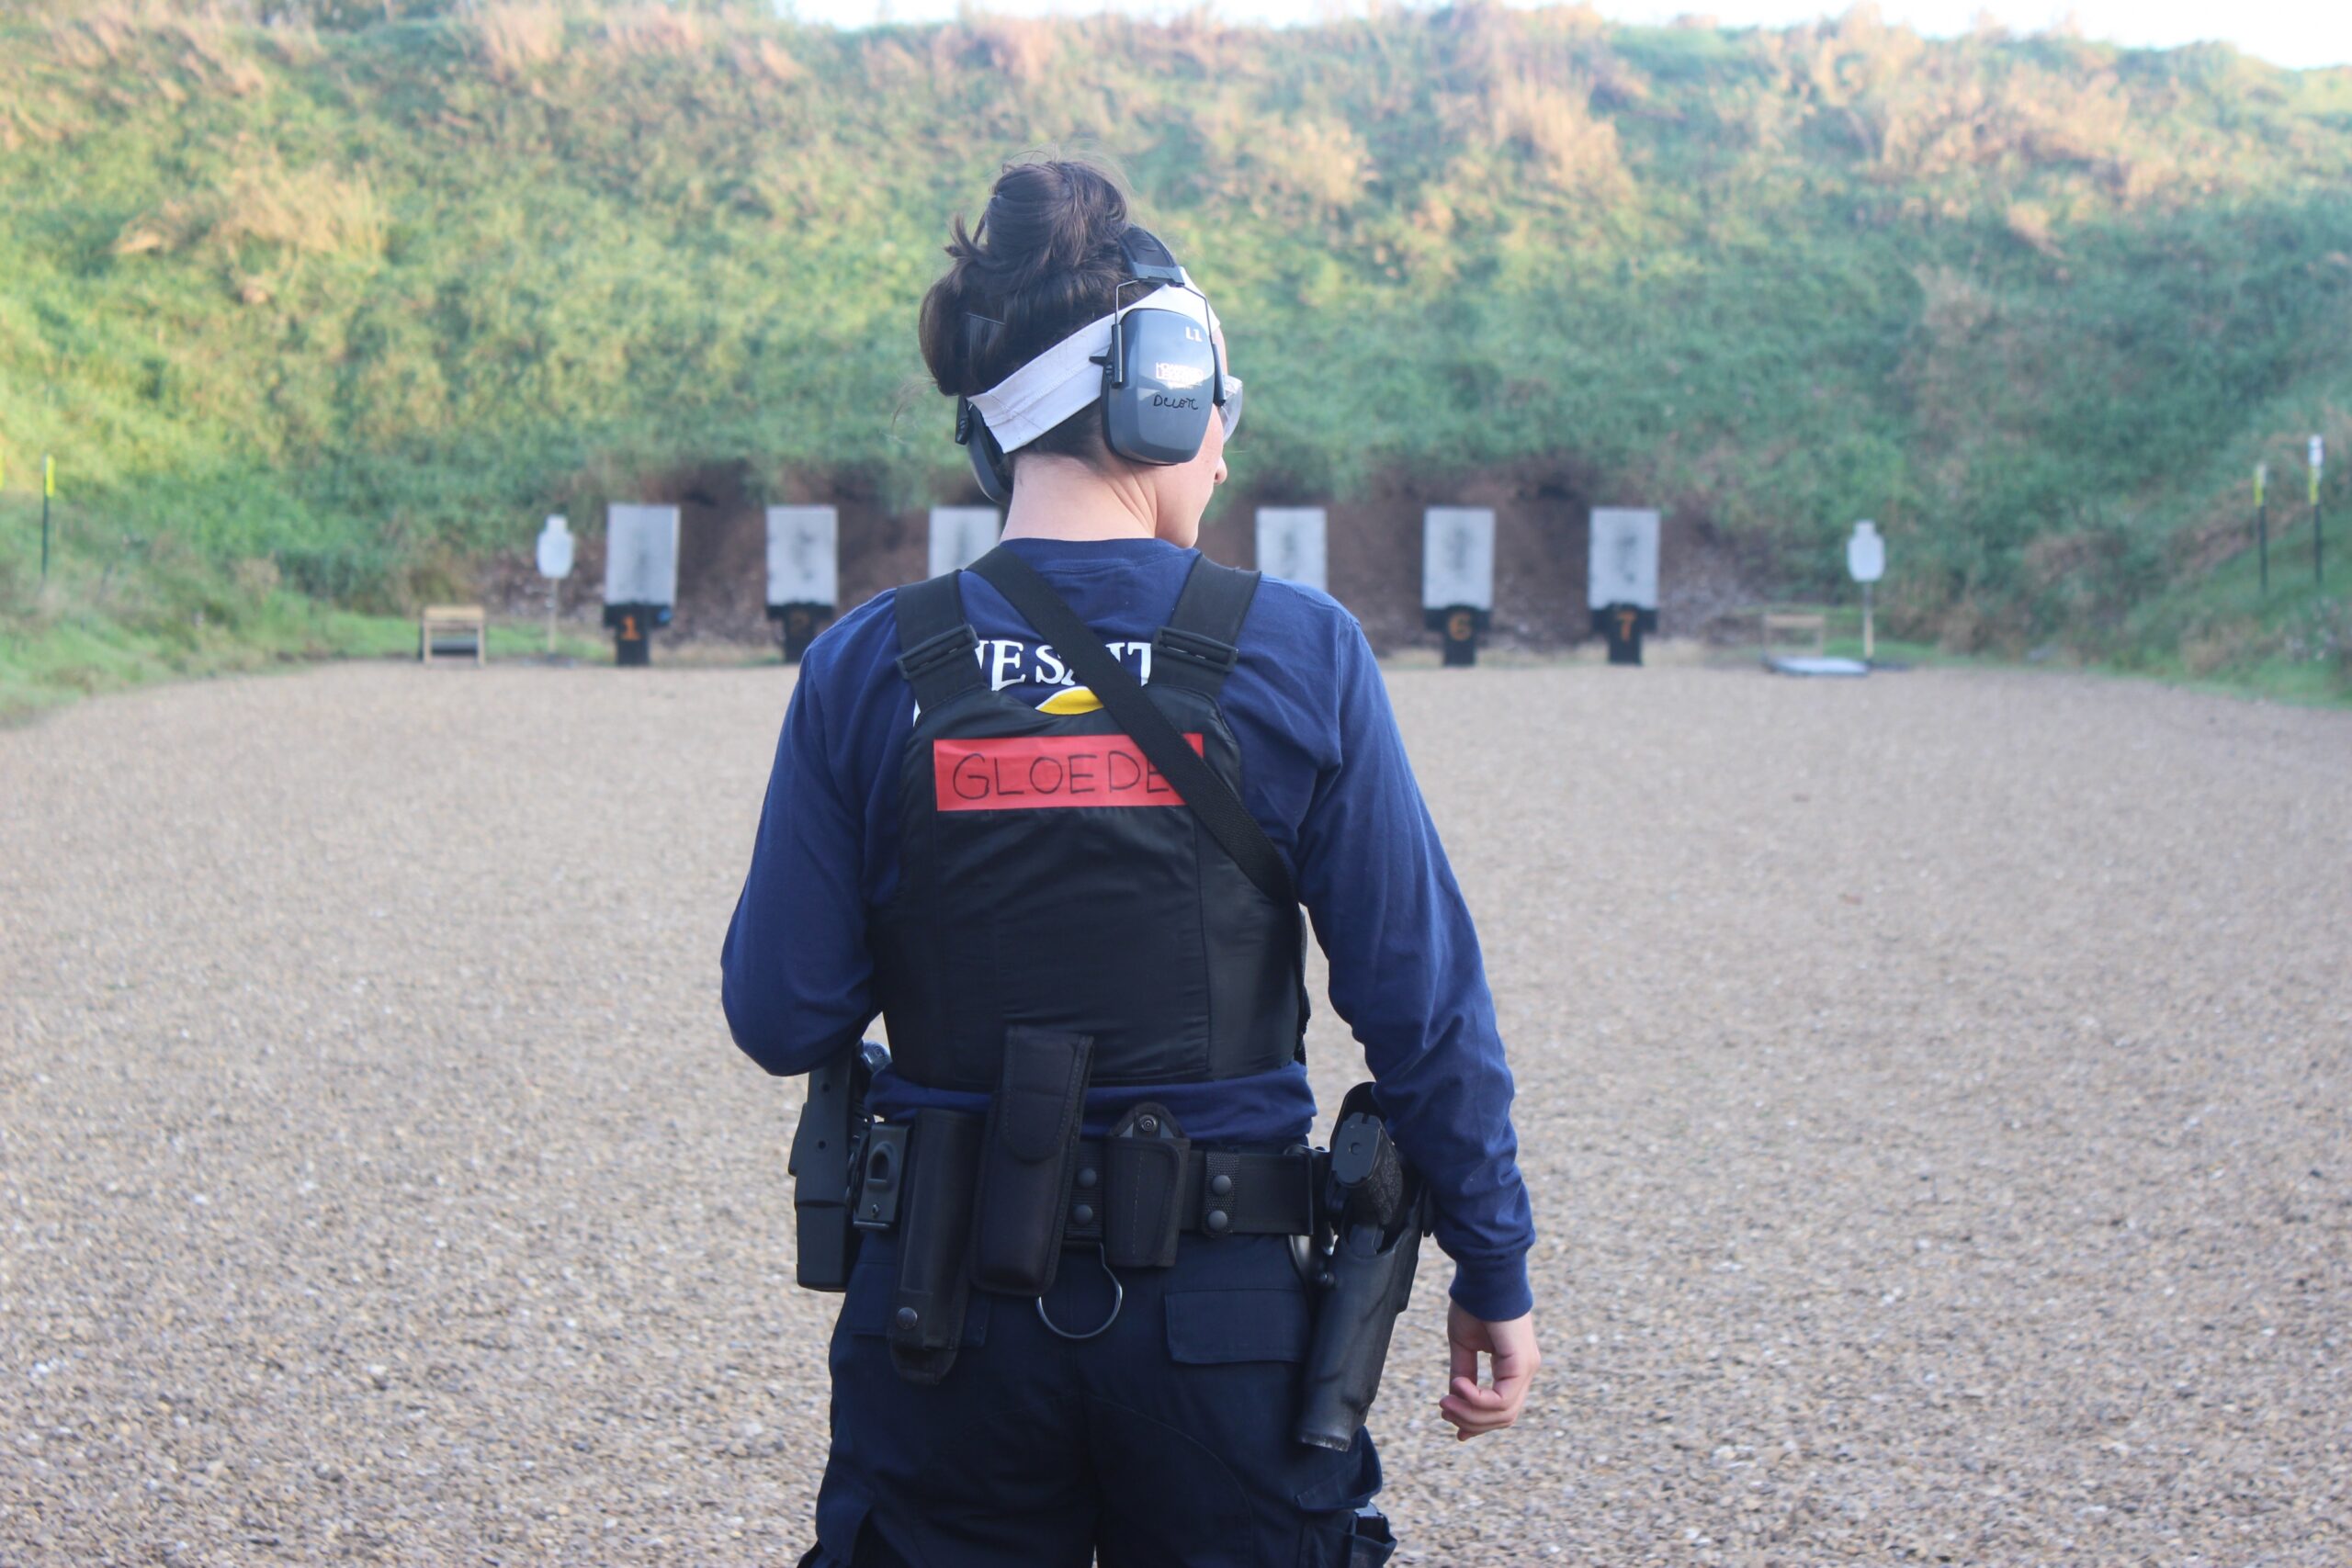 Recruit Clare Gloede listens to instructions at the Dane County Law Enforcement Training Center shooting range.